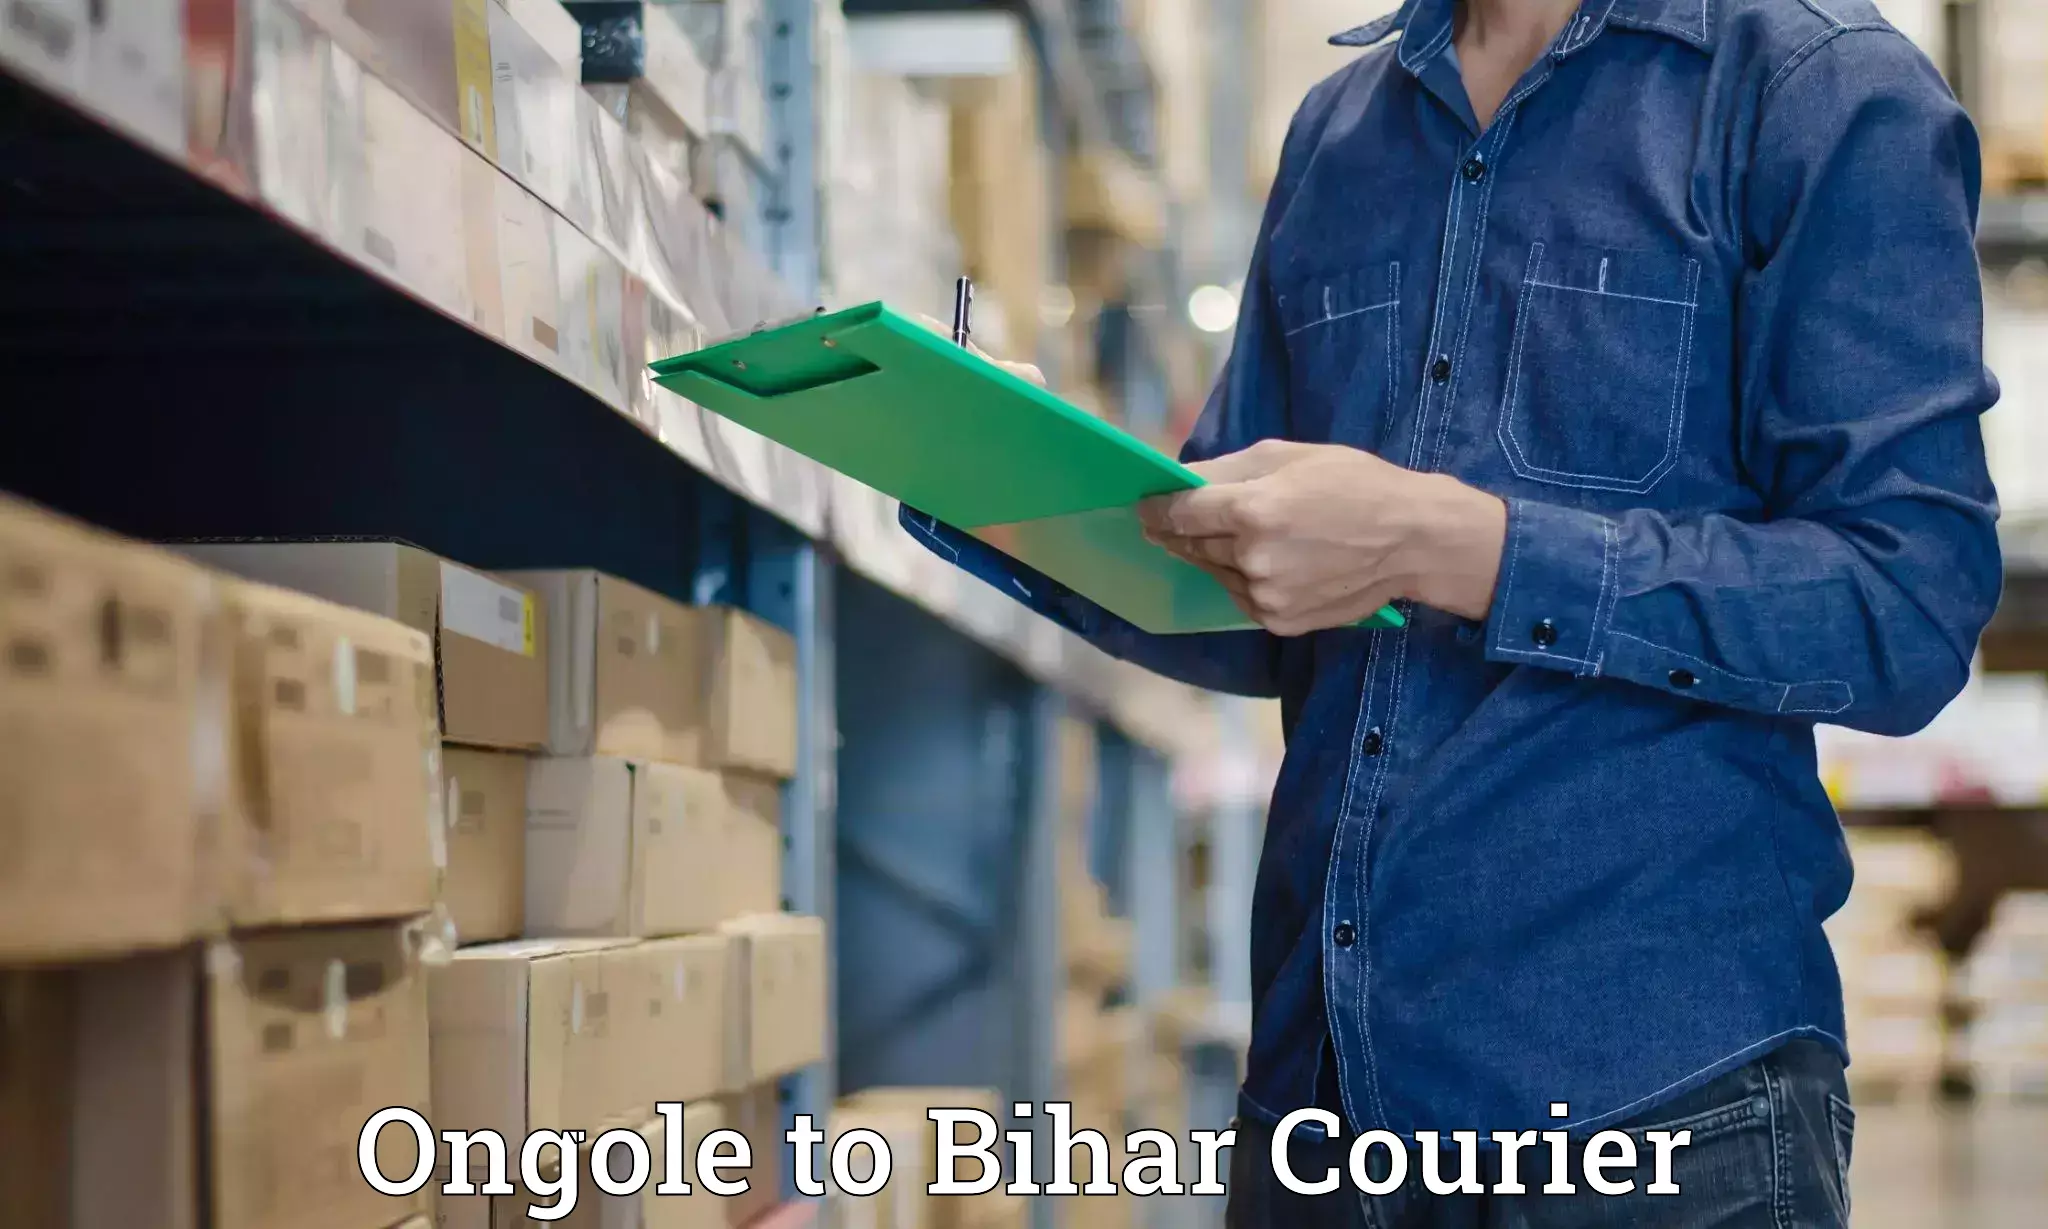 Urban courier service Ongole to Bihar